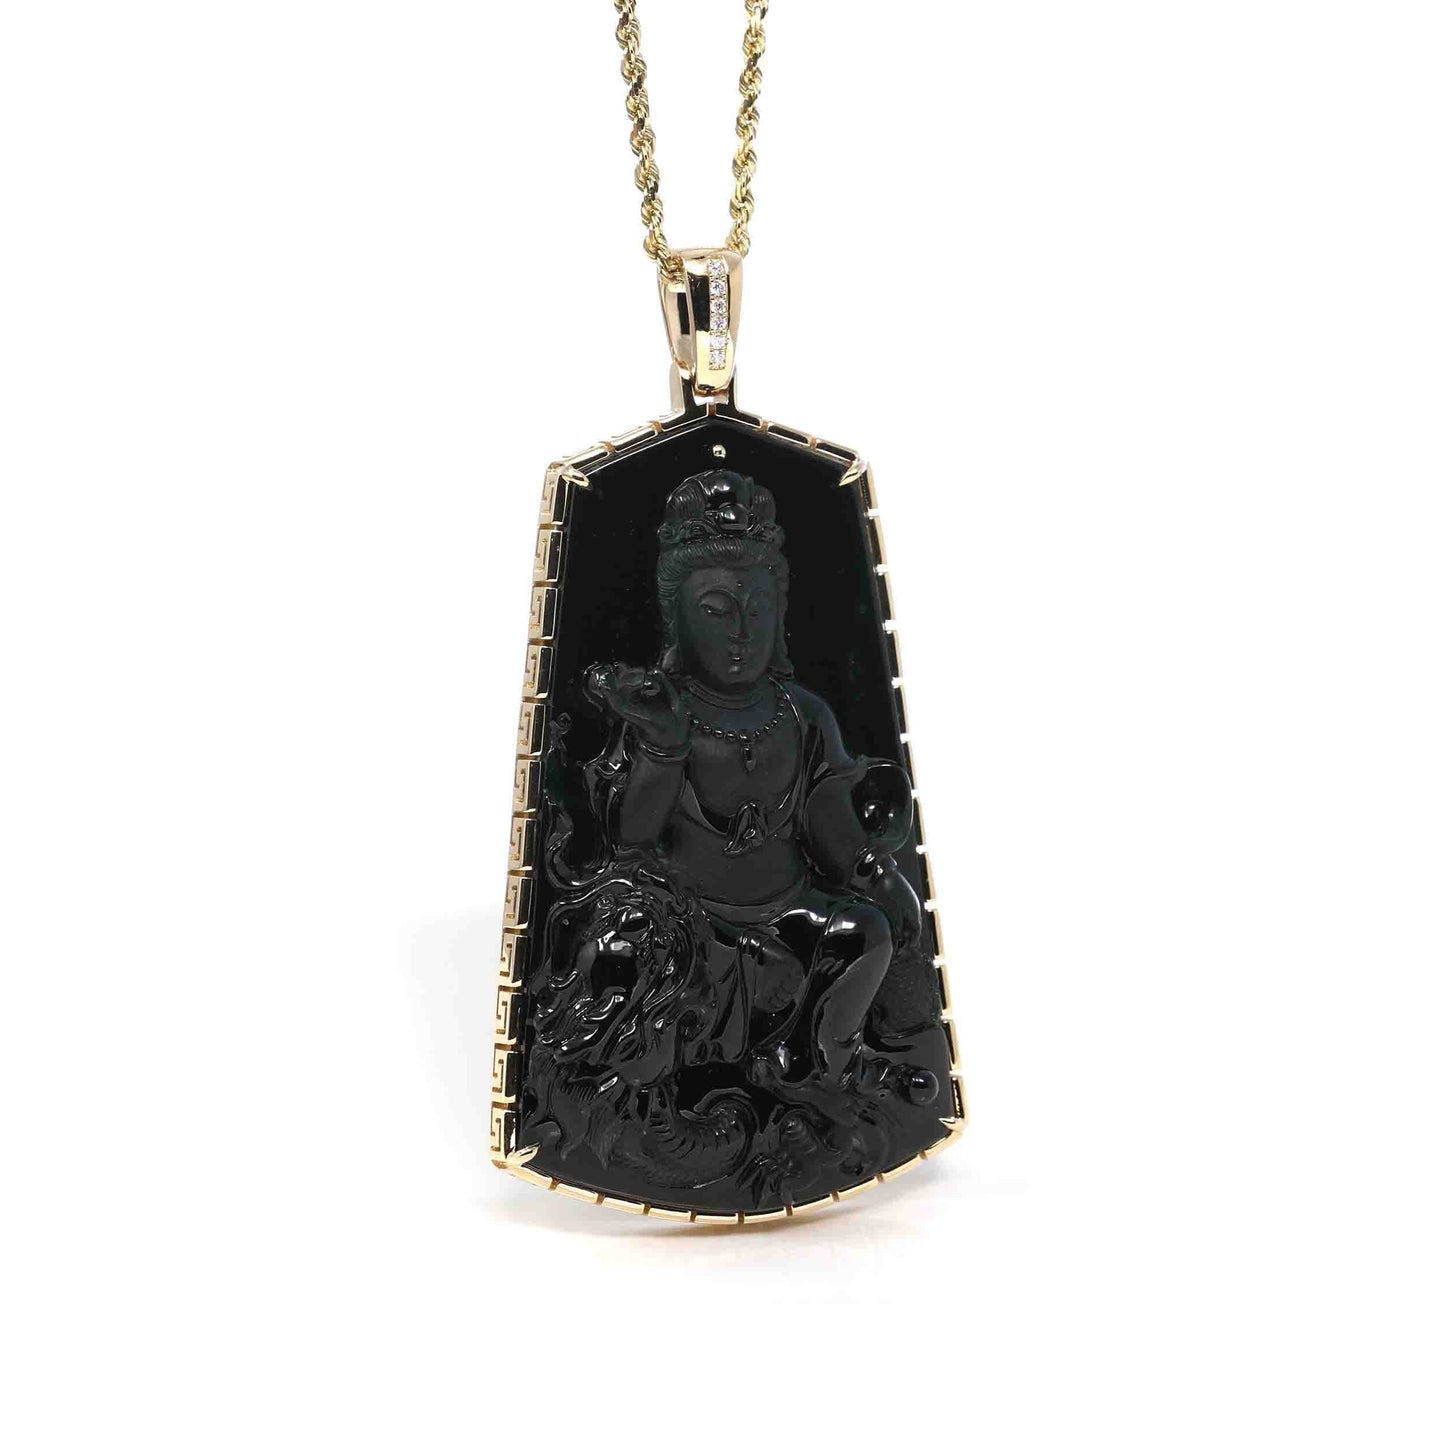 RealJade Co.¨ 14k Yellow Gold "Goddess of Compassion" Genuine Black Burmese Jadeite Jade Guanyin Necklace With Gold Bail